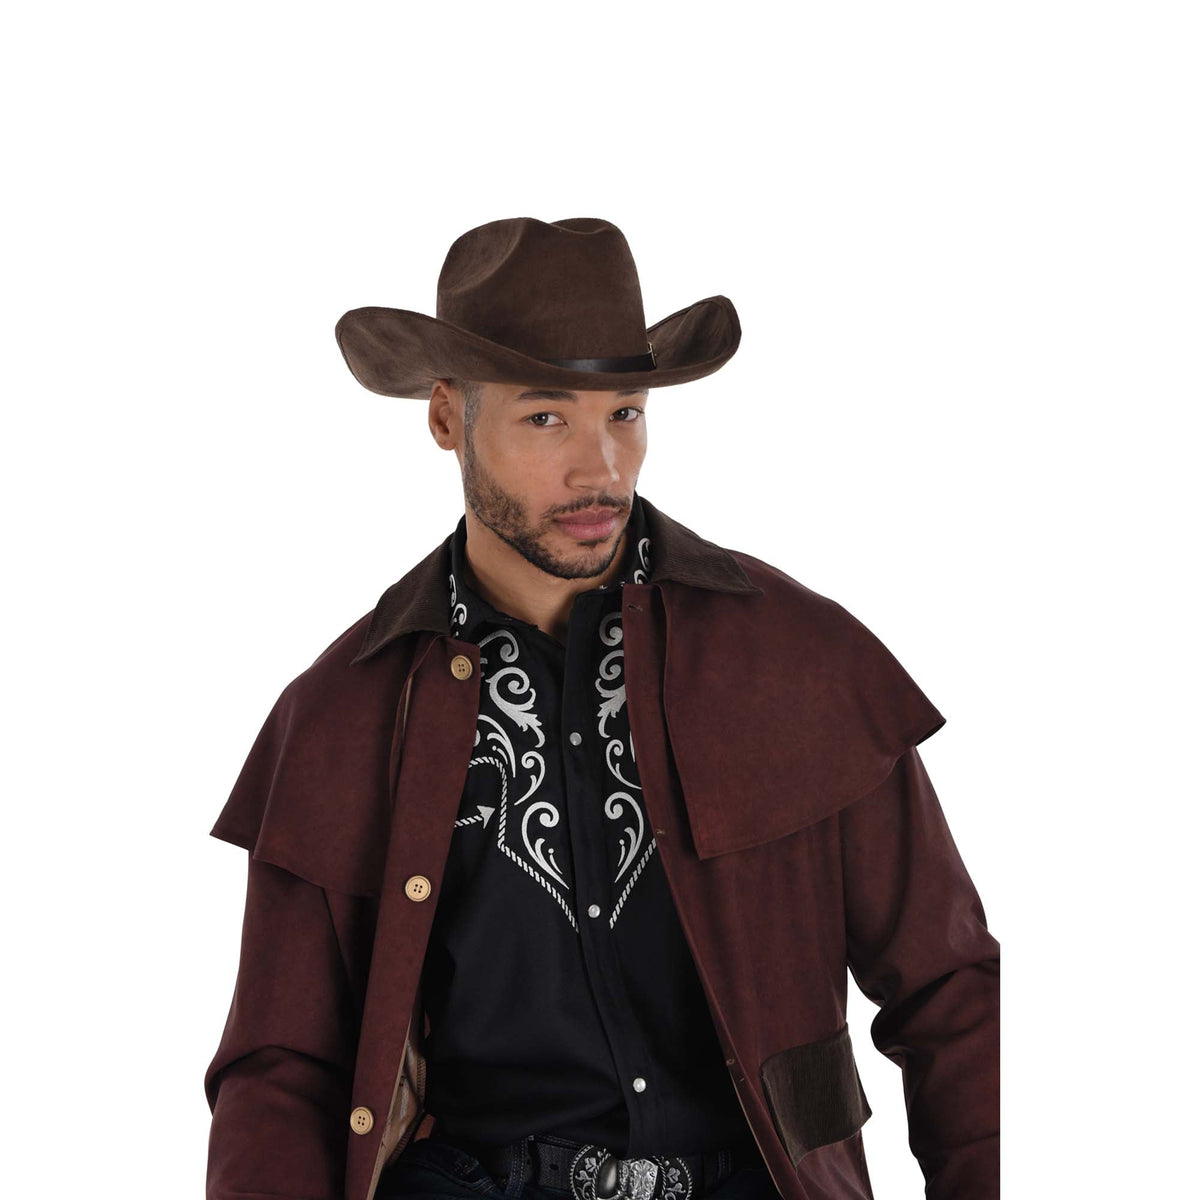 HALLOWEEN COSTUME CO. Costume Accessories Dark Brown Western Cowboy Hat for Adults 192937451809